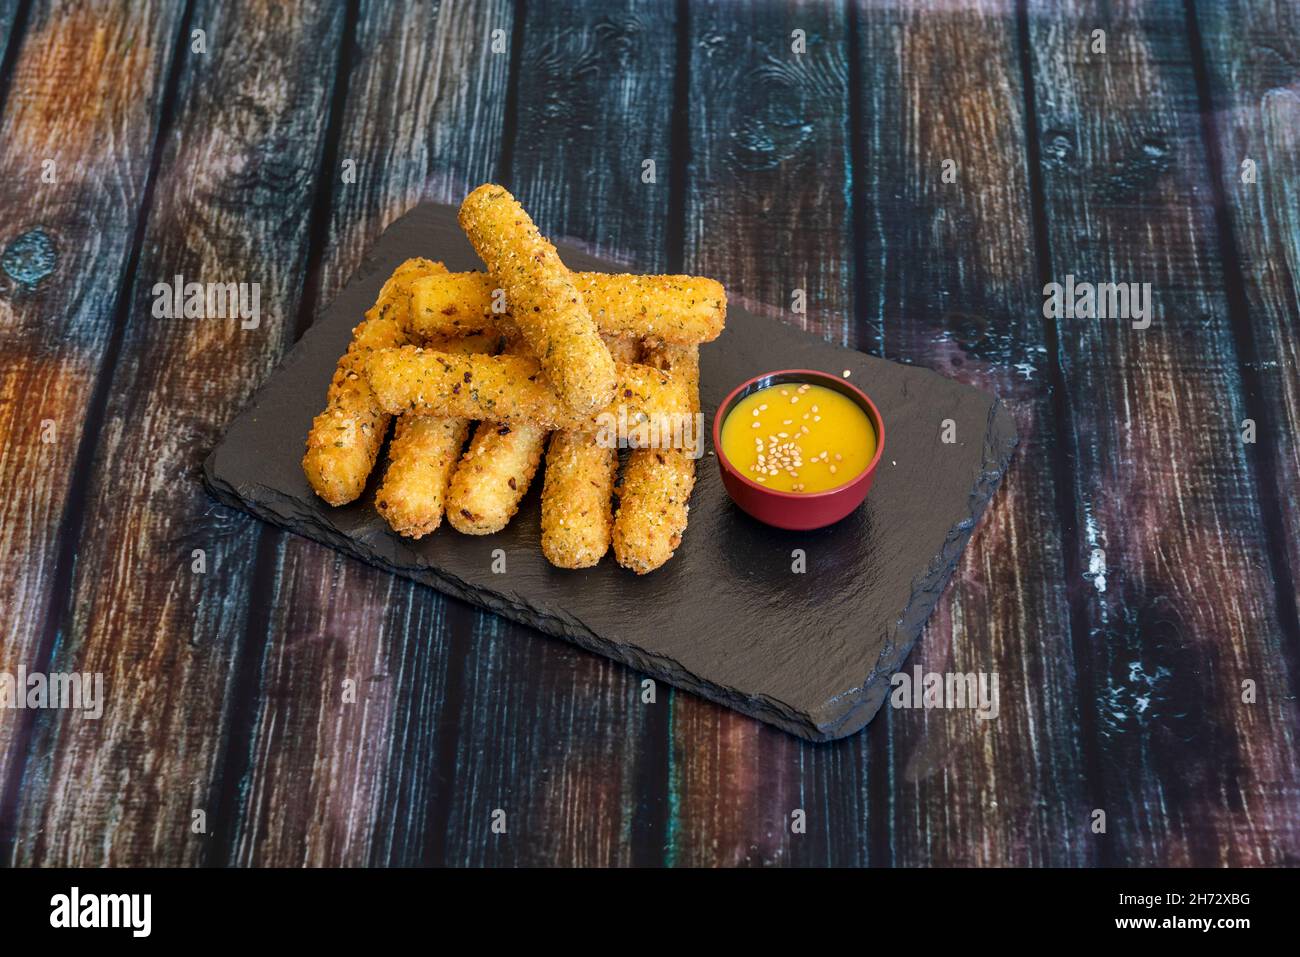 Mozzarella sticks are long pieces of mozzarella cheese that are battered or breaded and fried. Often served in restaurants as an aperitif Stock Photo